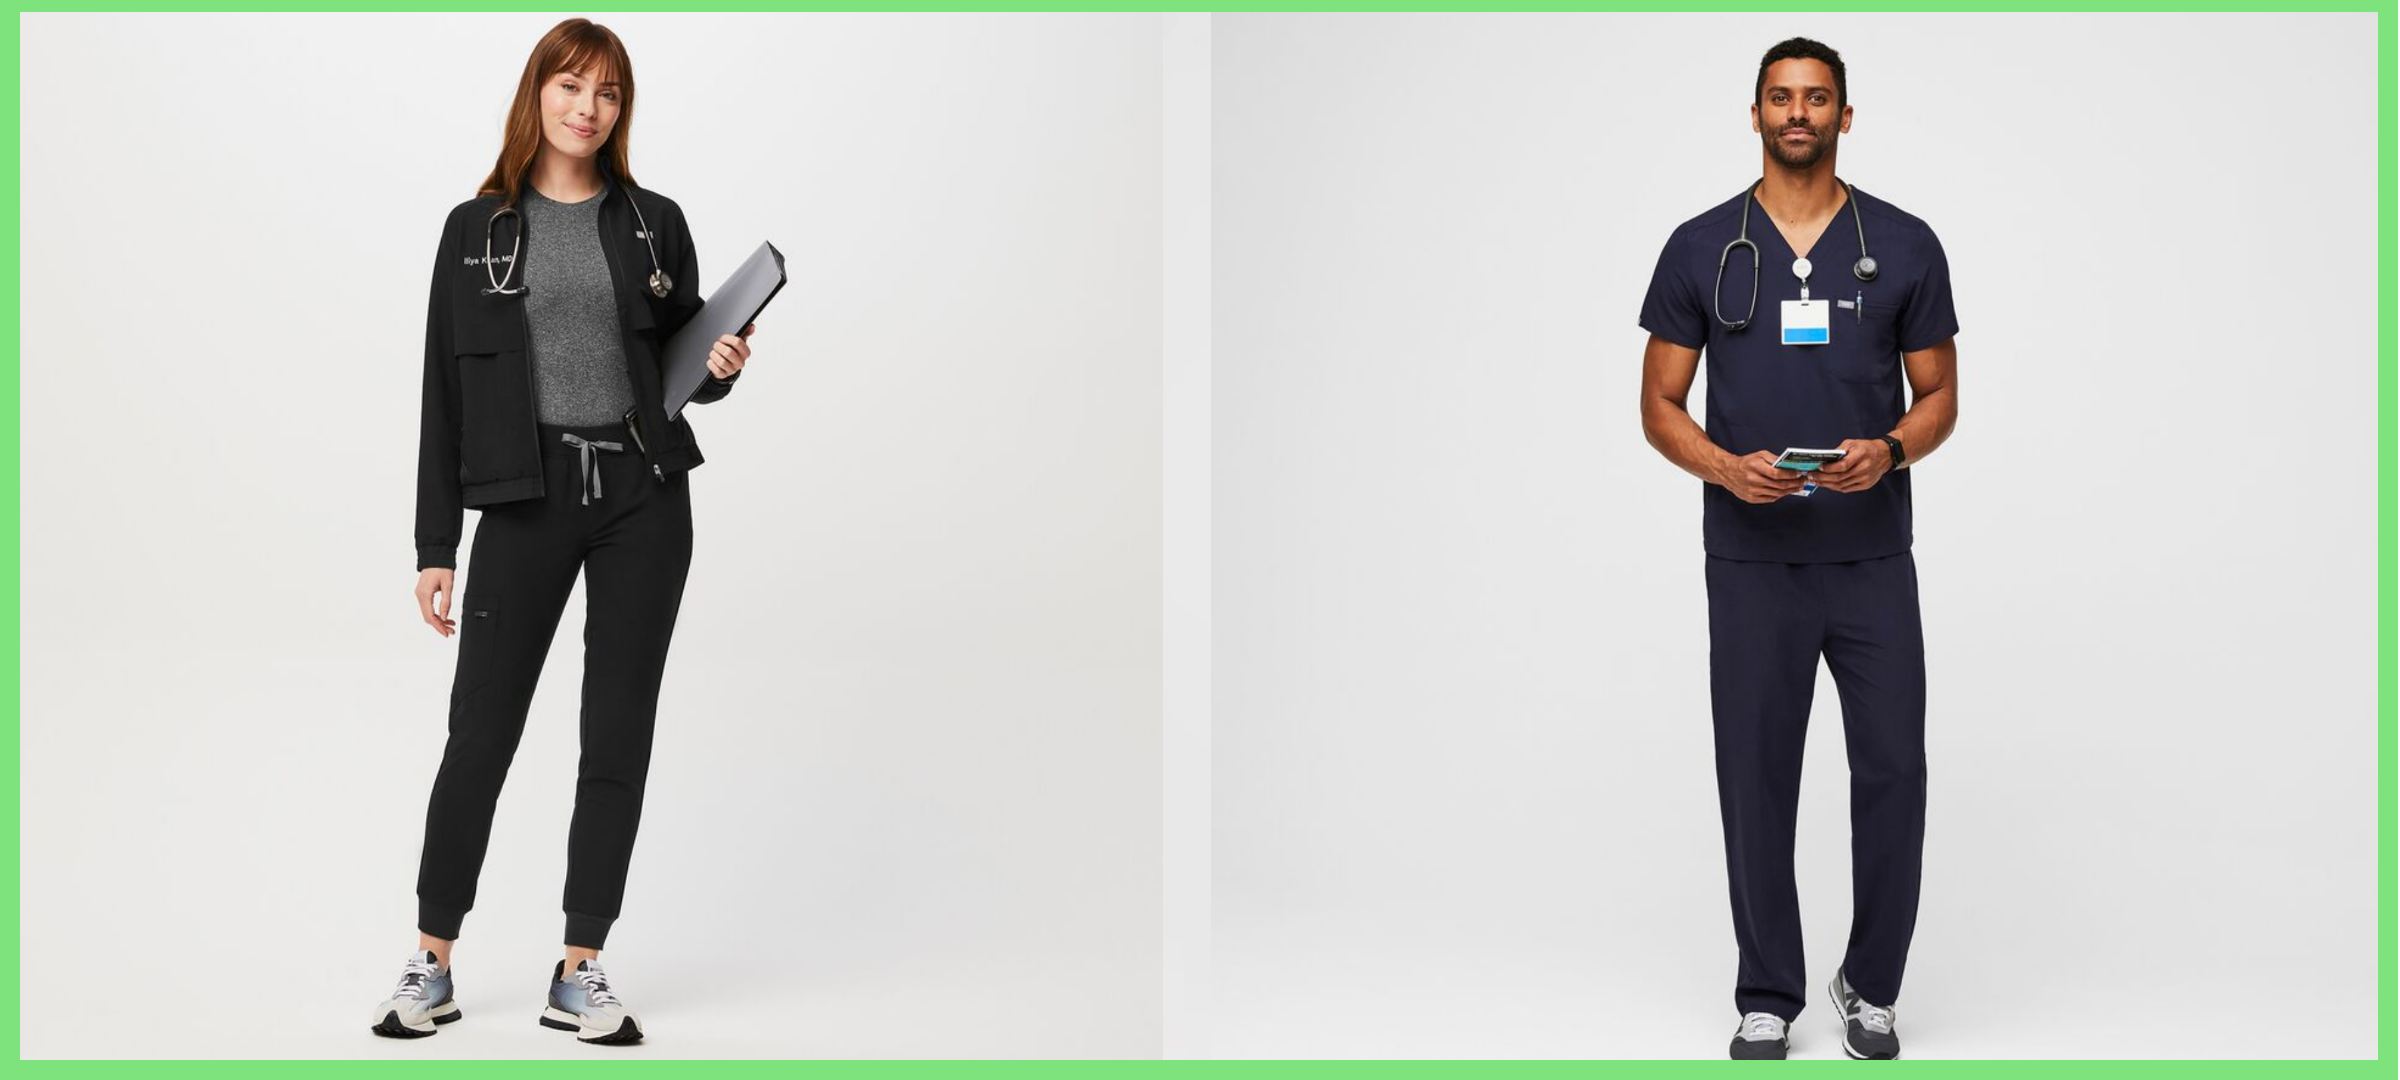 FIGS: A Medical Apparel Brand to Bring Stylish Scrubs to Healthcare ...